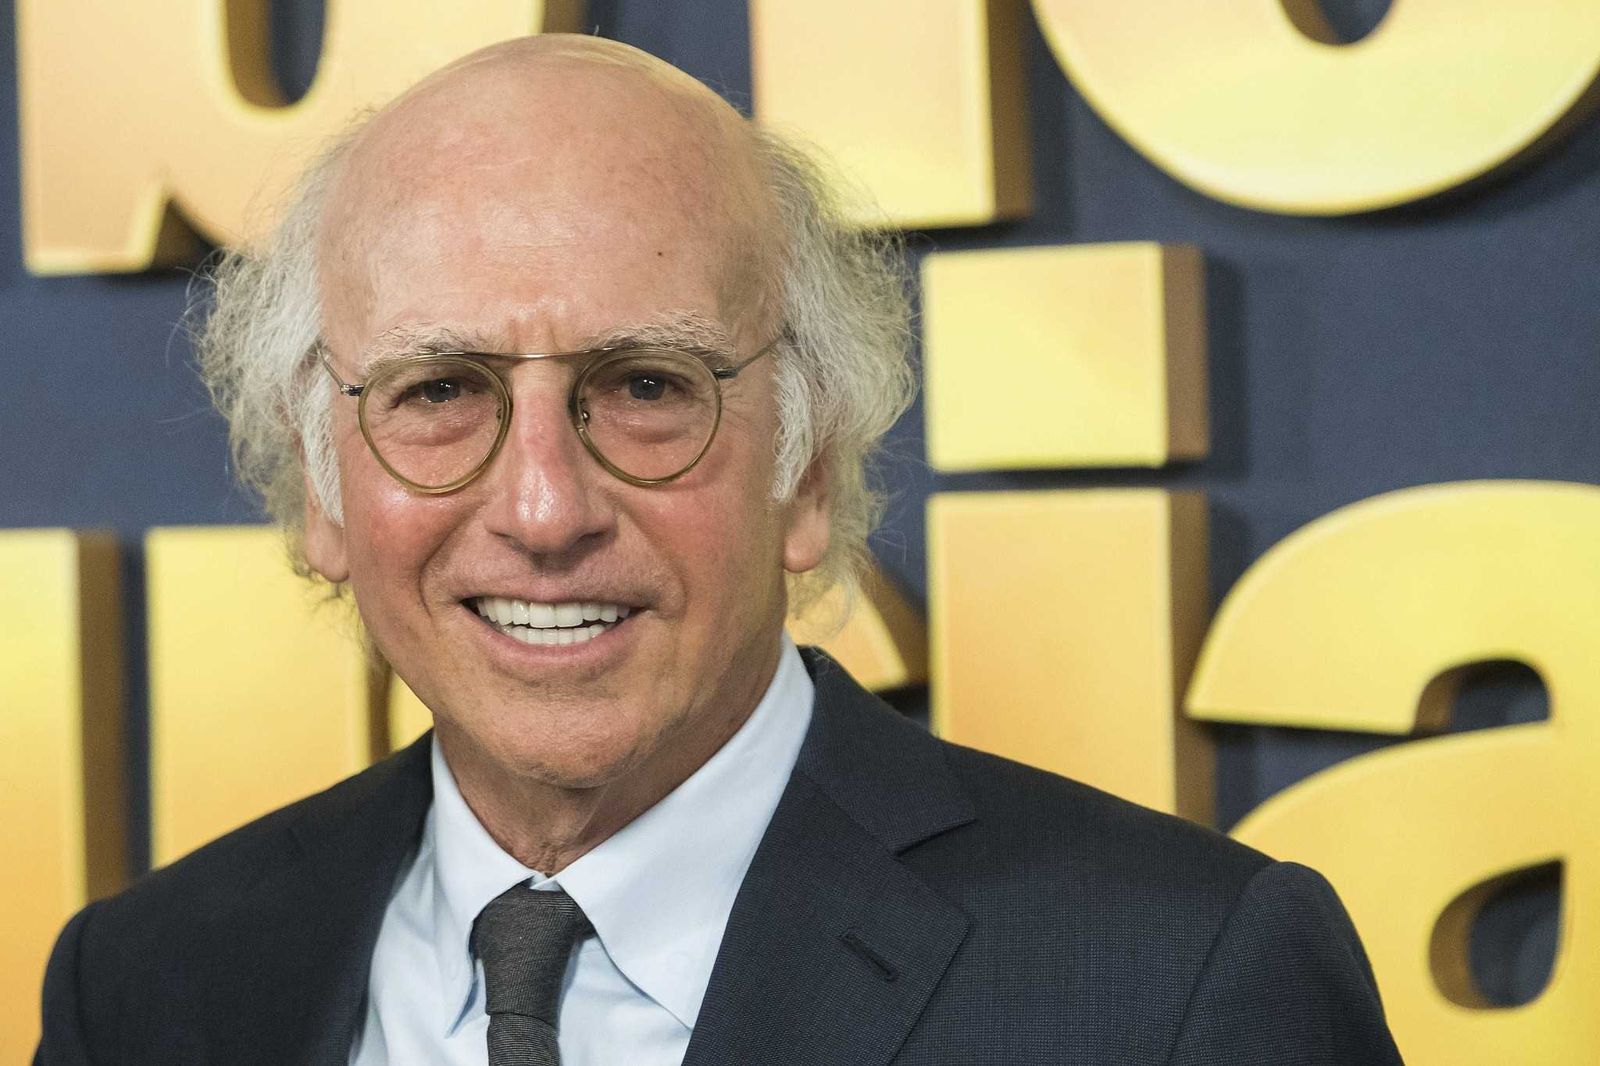 'I'm never wrong,' quipped Larry David, but the FTX Fiasco tells a different tale